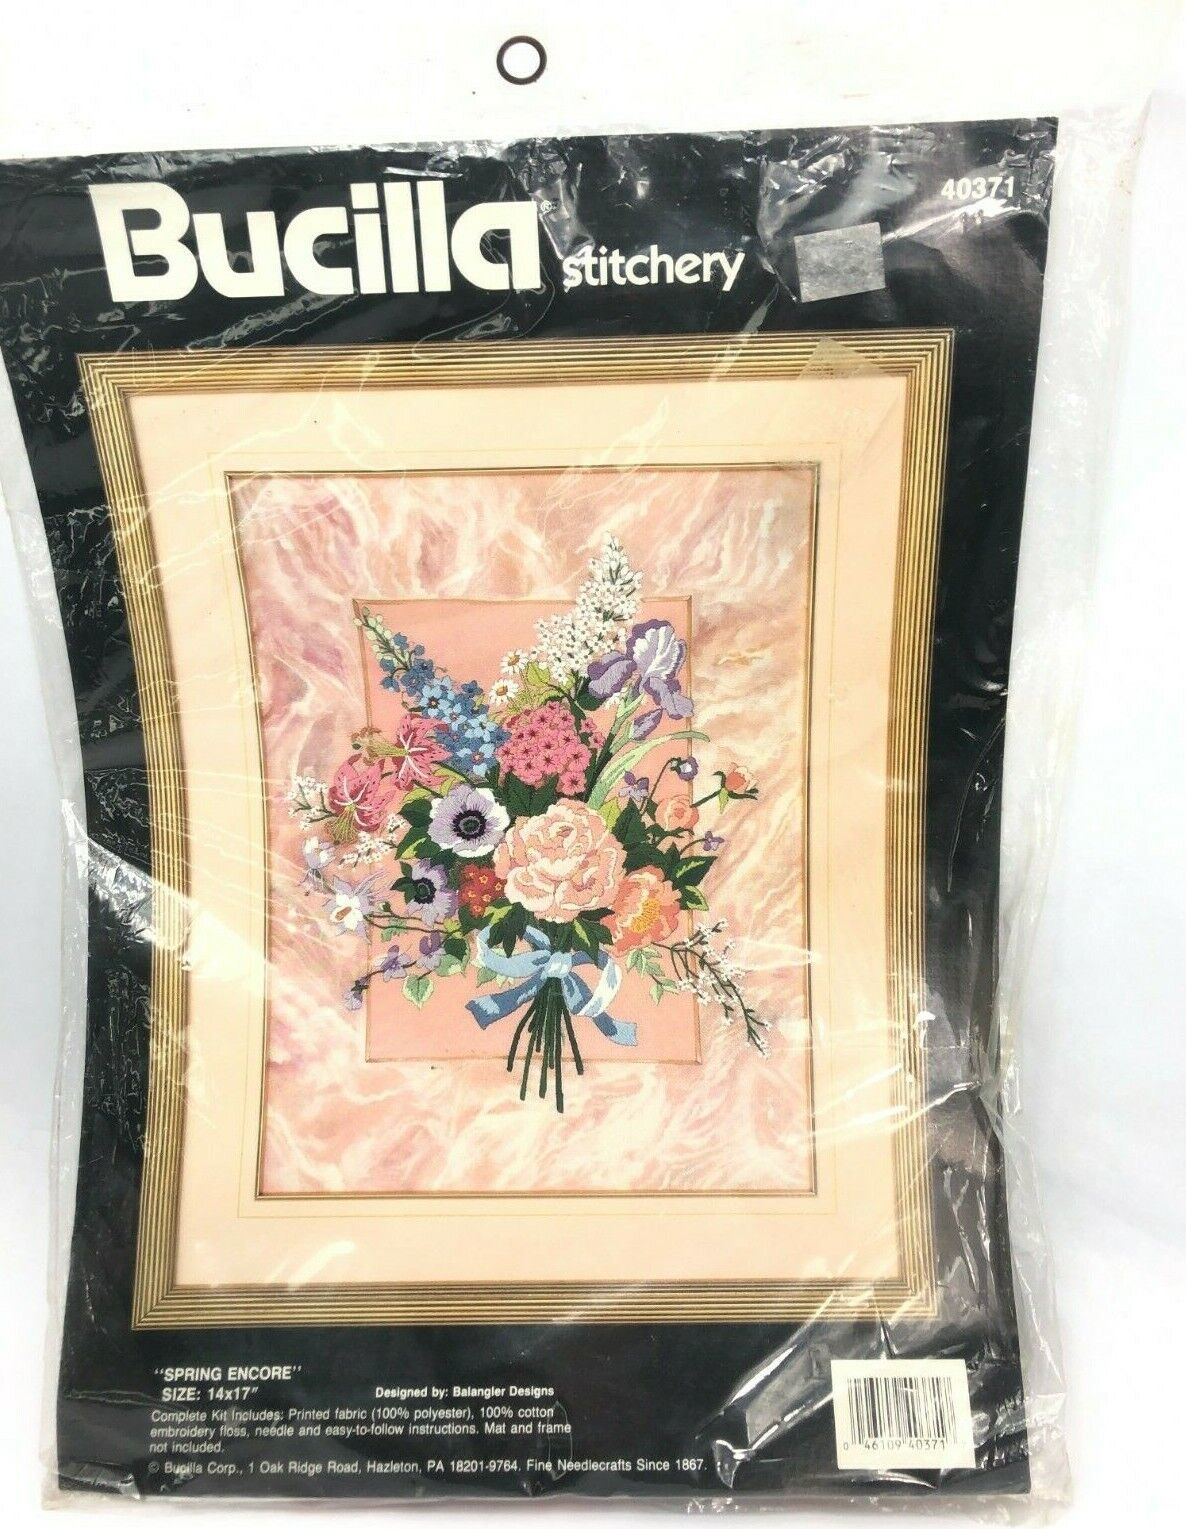 Primary image for Bucilla Spring Encore New/Unopened Stichery Needlepoint 40371 Vintage 14 x 17